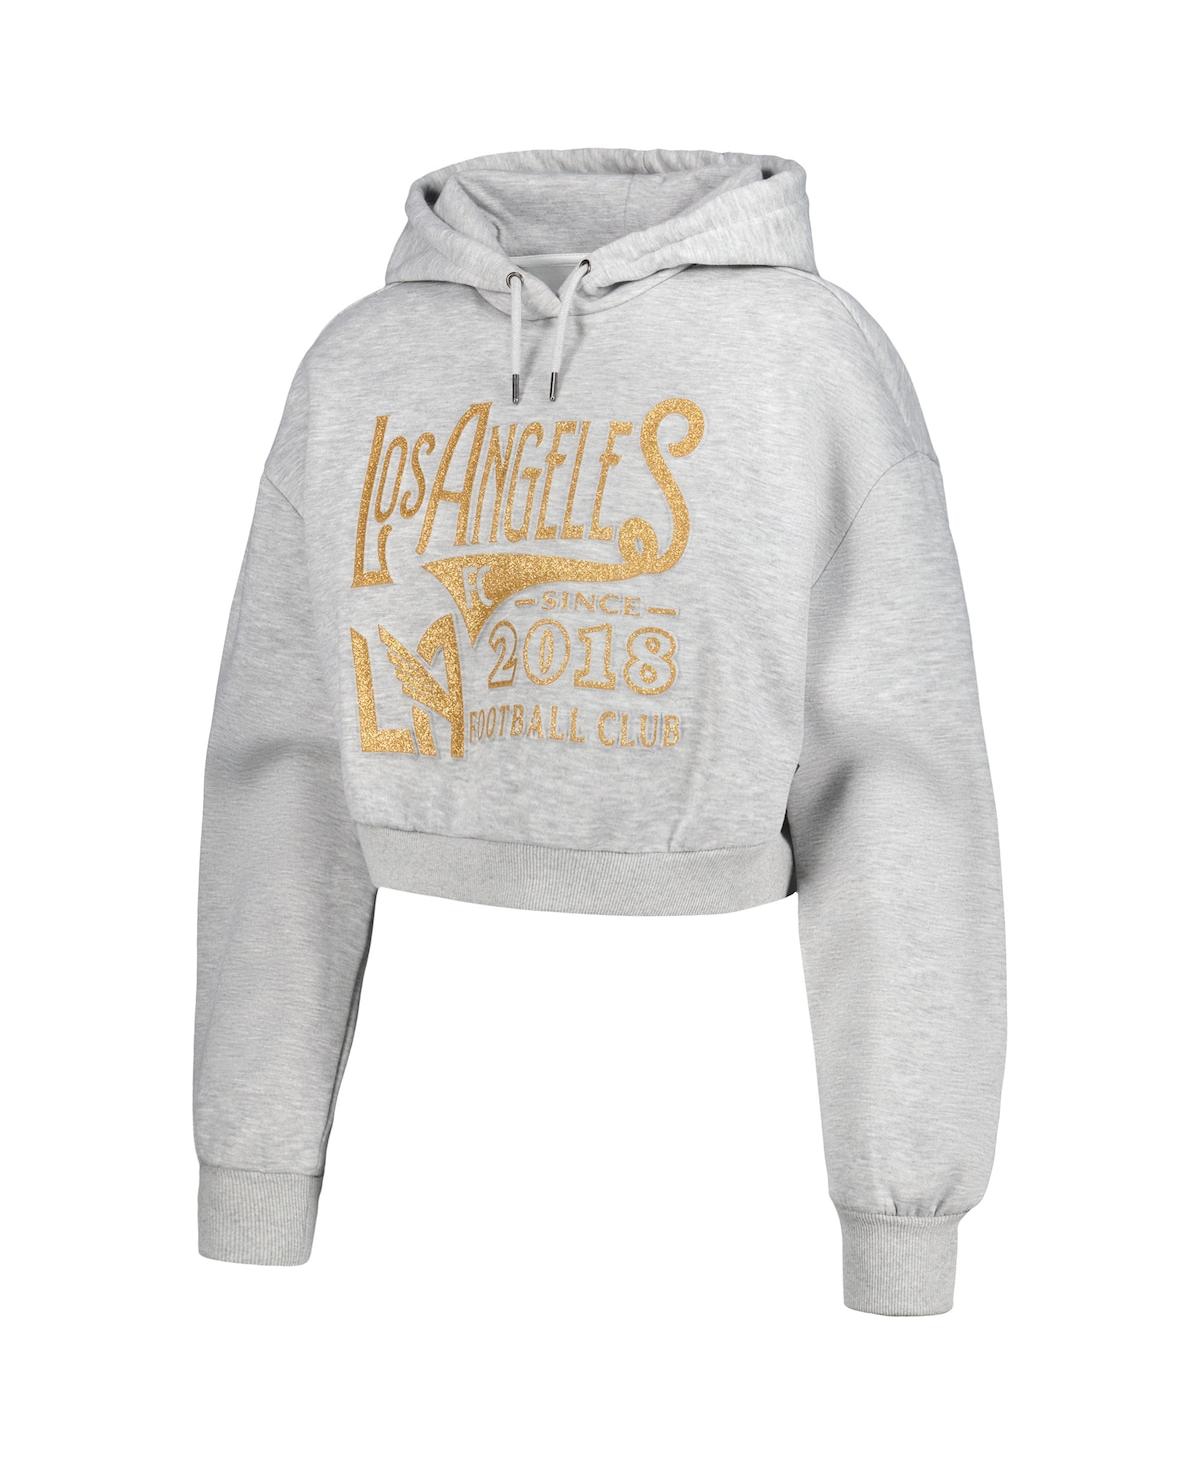 Shop The Wild Collective Women's  Heather Gray Lafc Cropped Pullover Hoodie